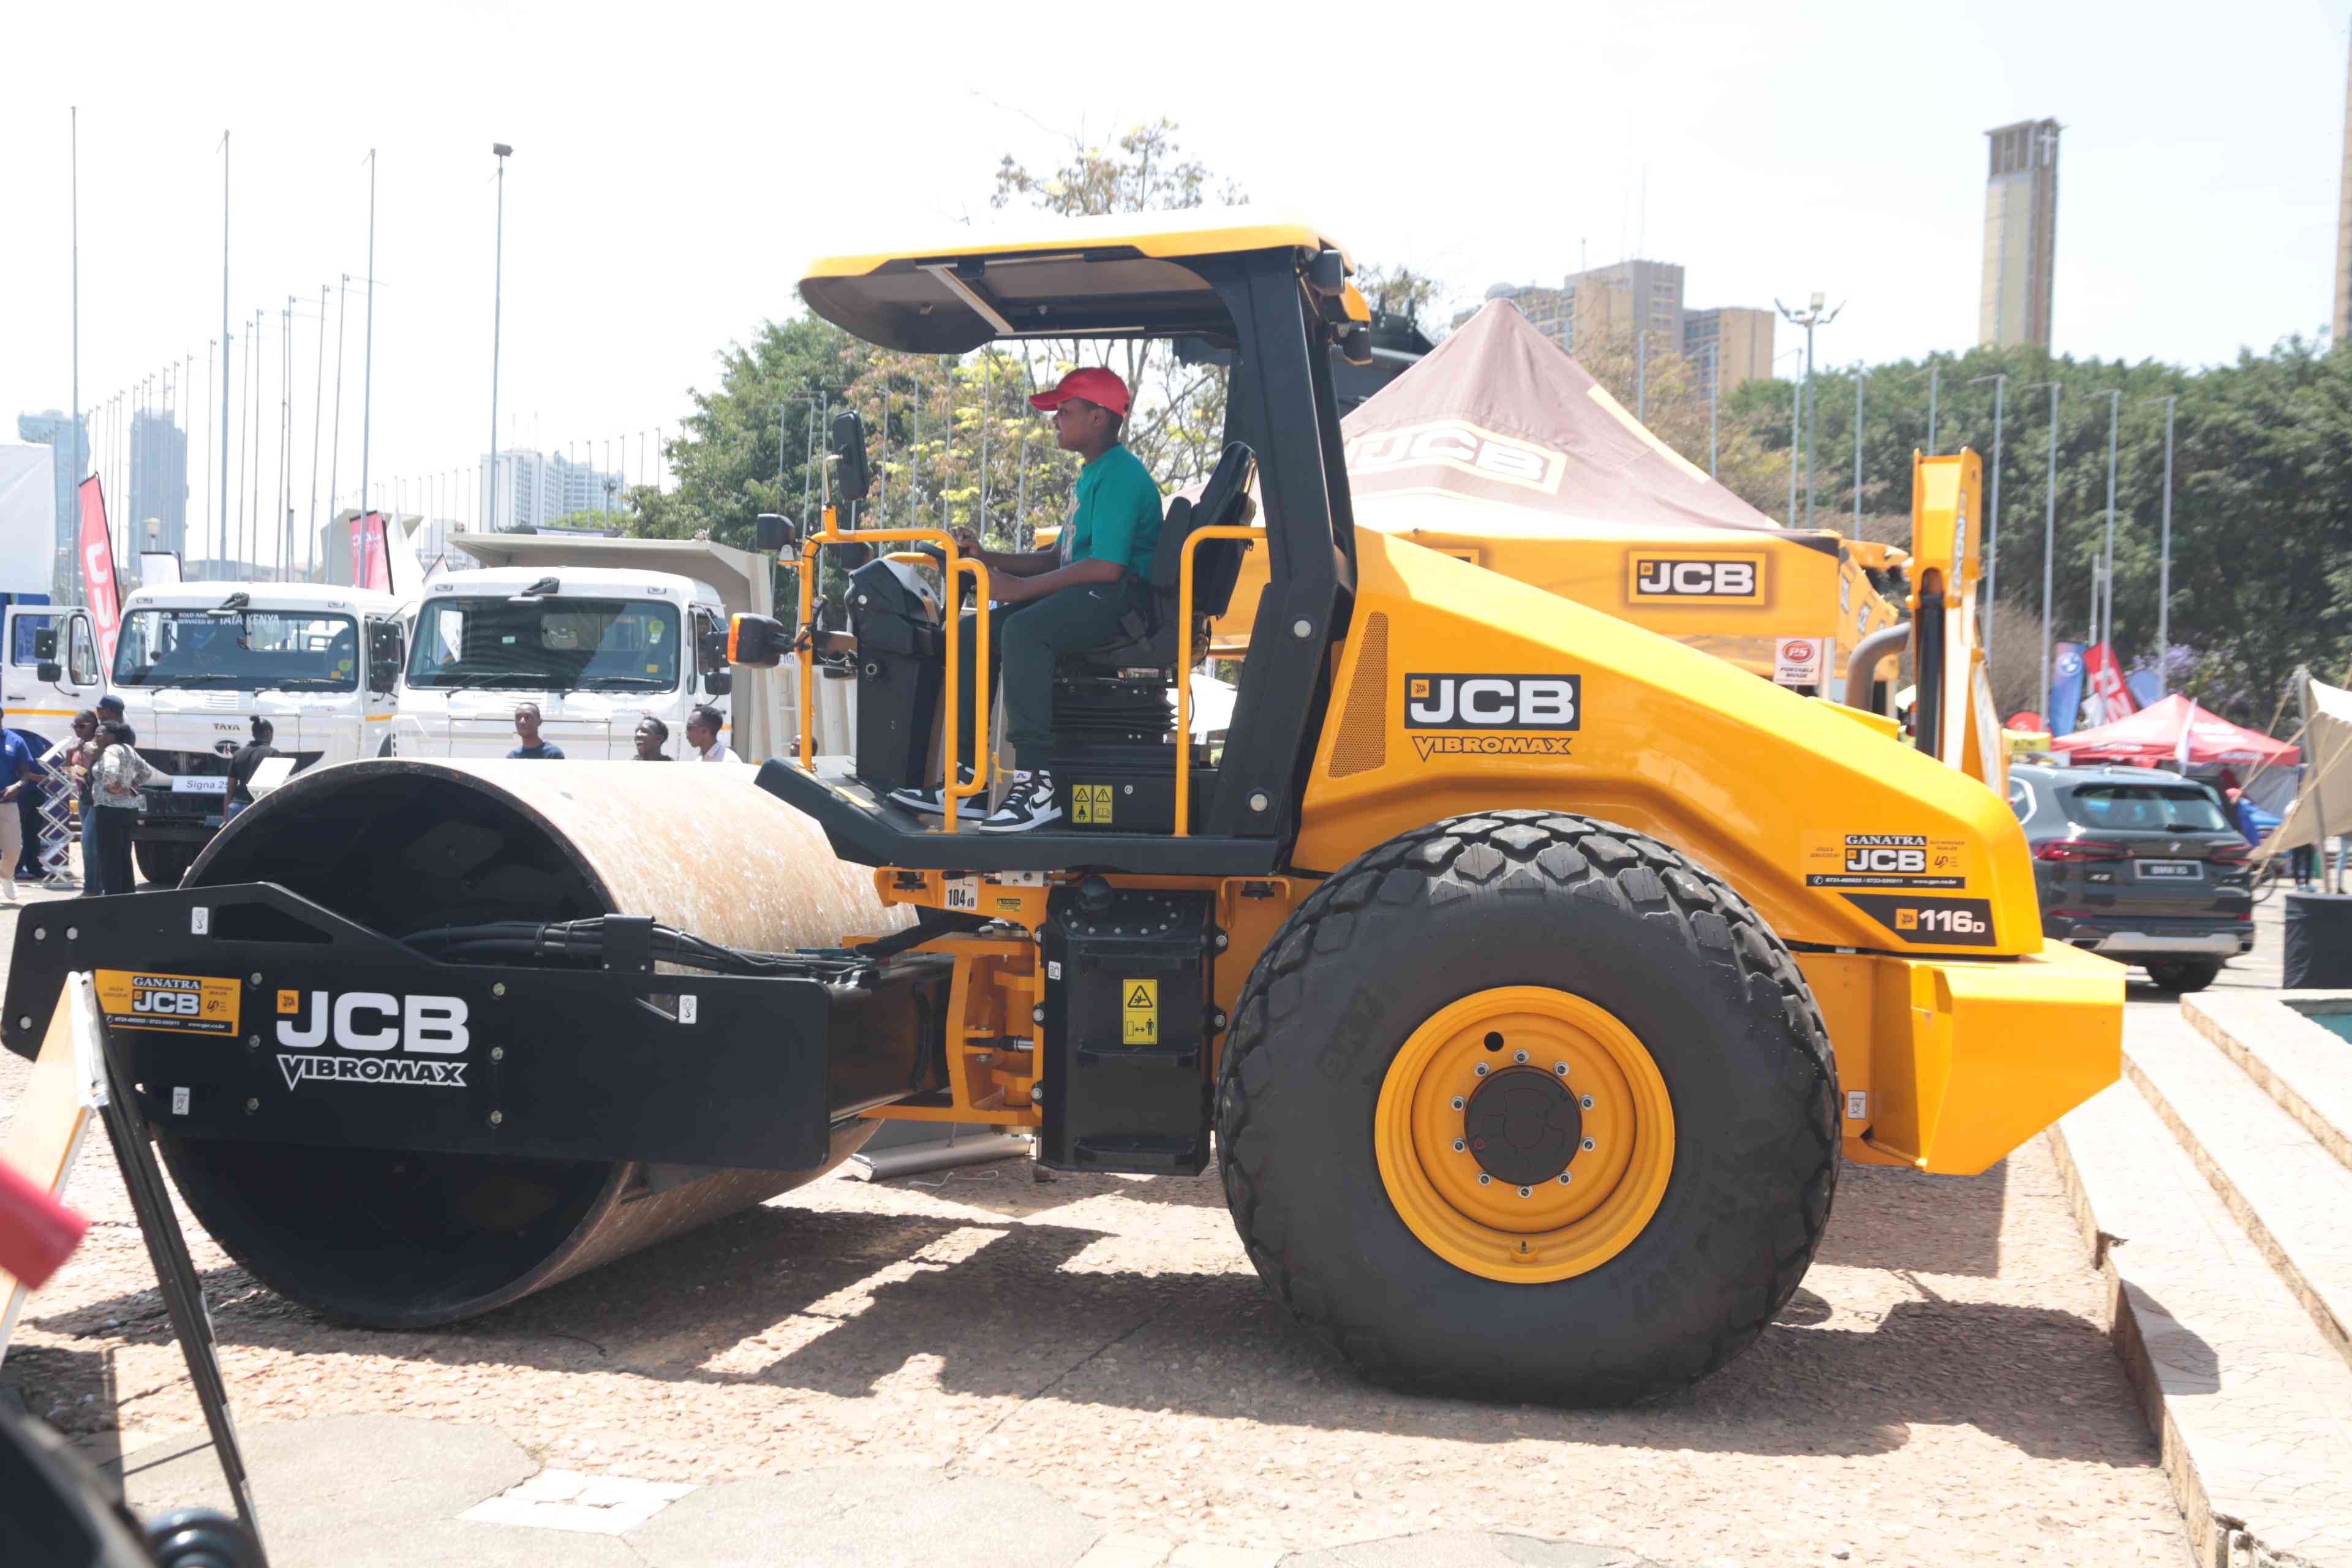 The JCB Roller Compactor on display